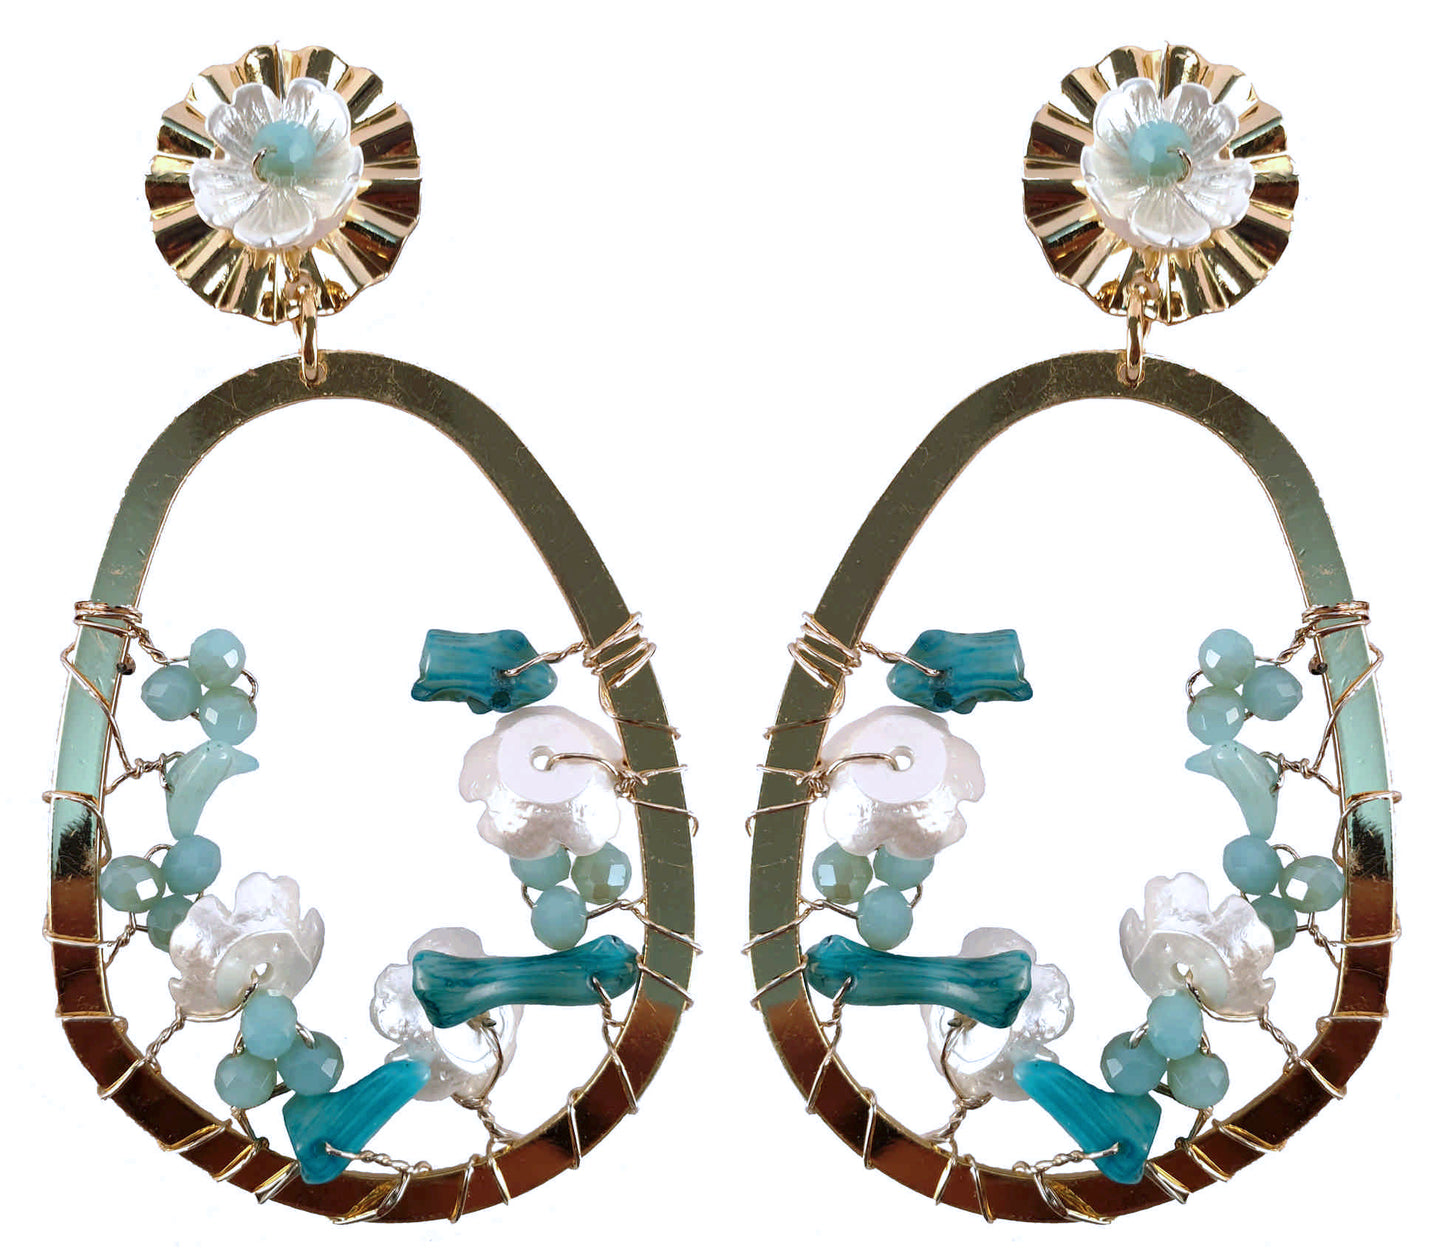 Rhinestones Roots in Oval Ring Floral Design Fancy Artificial Imitation Fashion Earrings for Girls Women